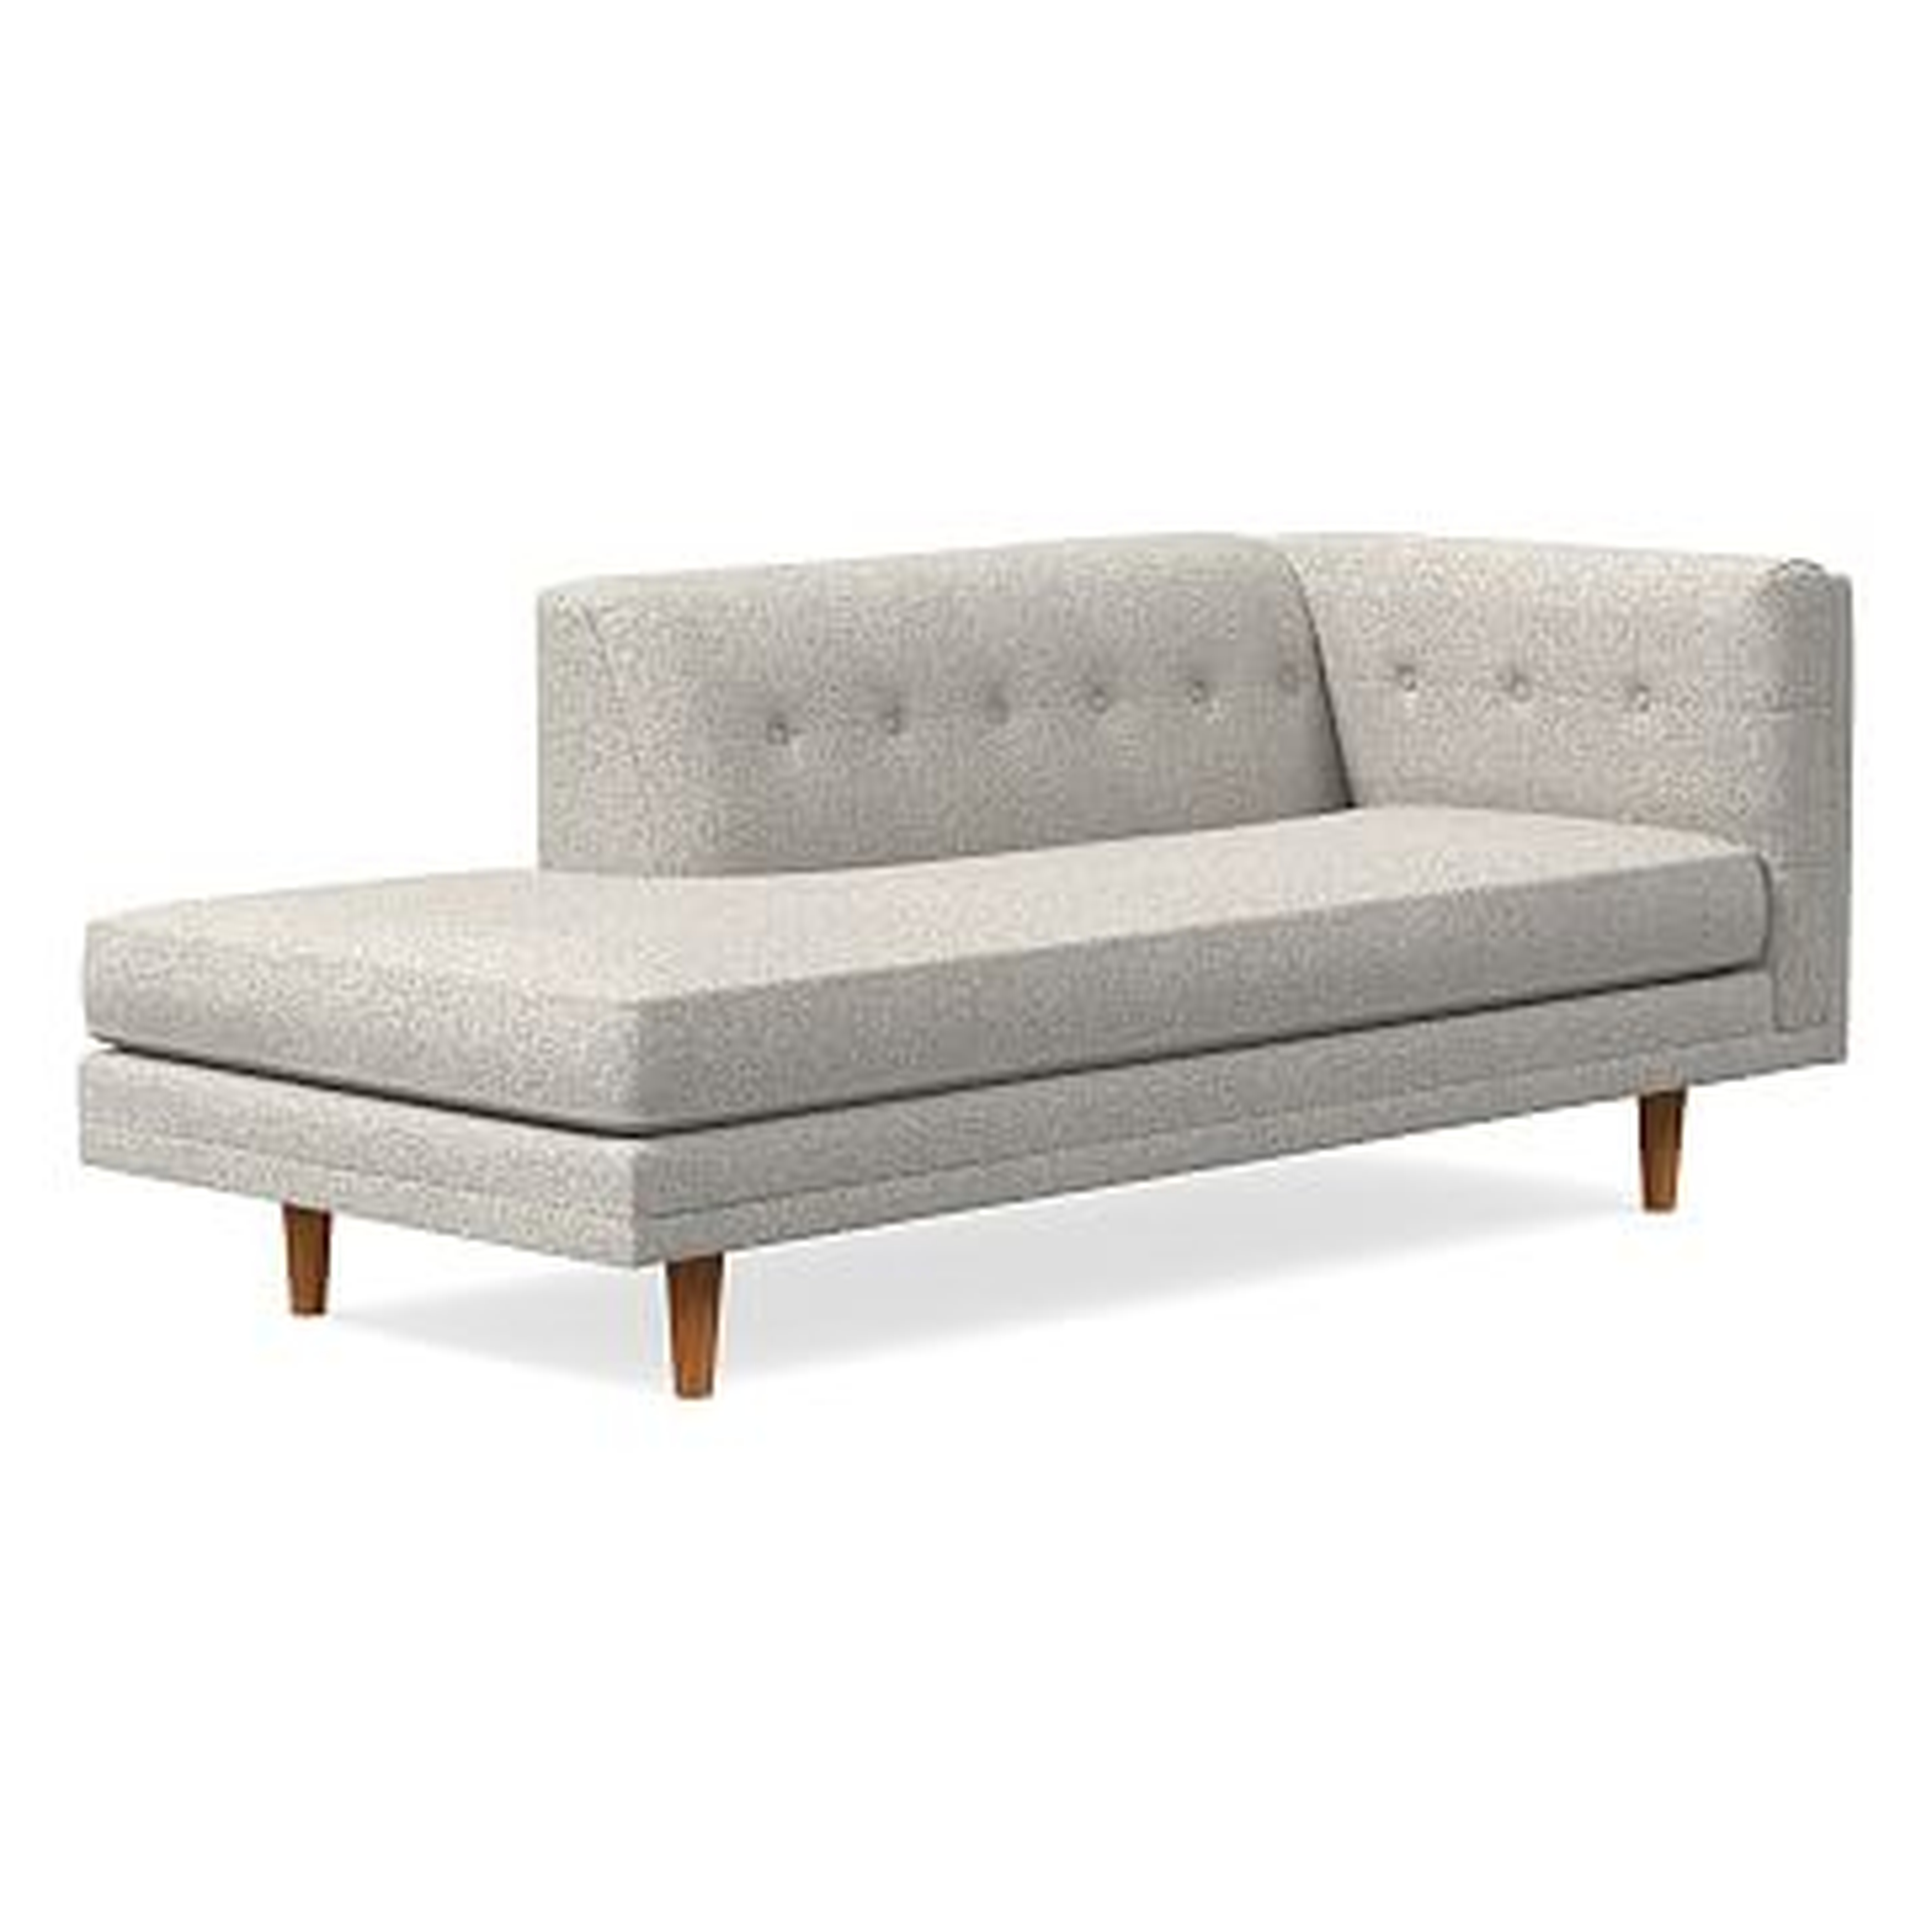 Bradford Right Arm Chaise Lounger, Poly, Chenille Tweed, Storm Gray, Pecan - West Elm